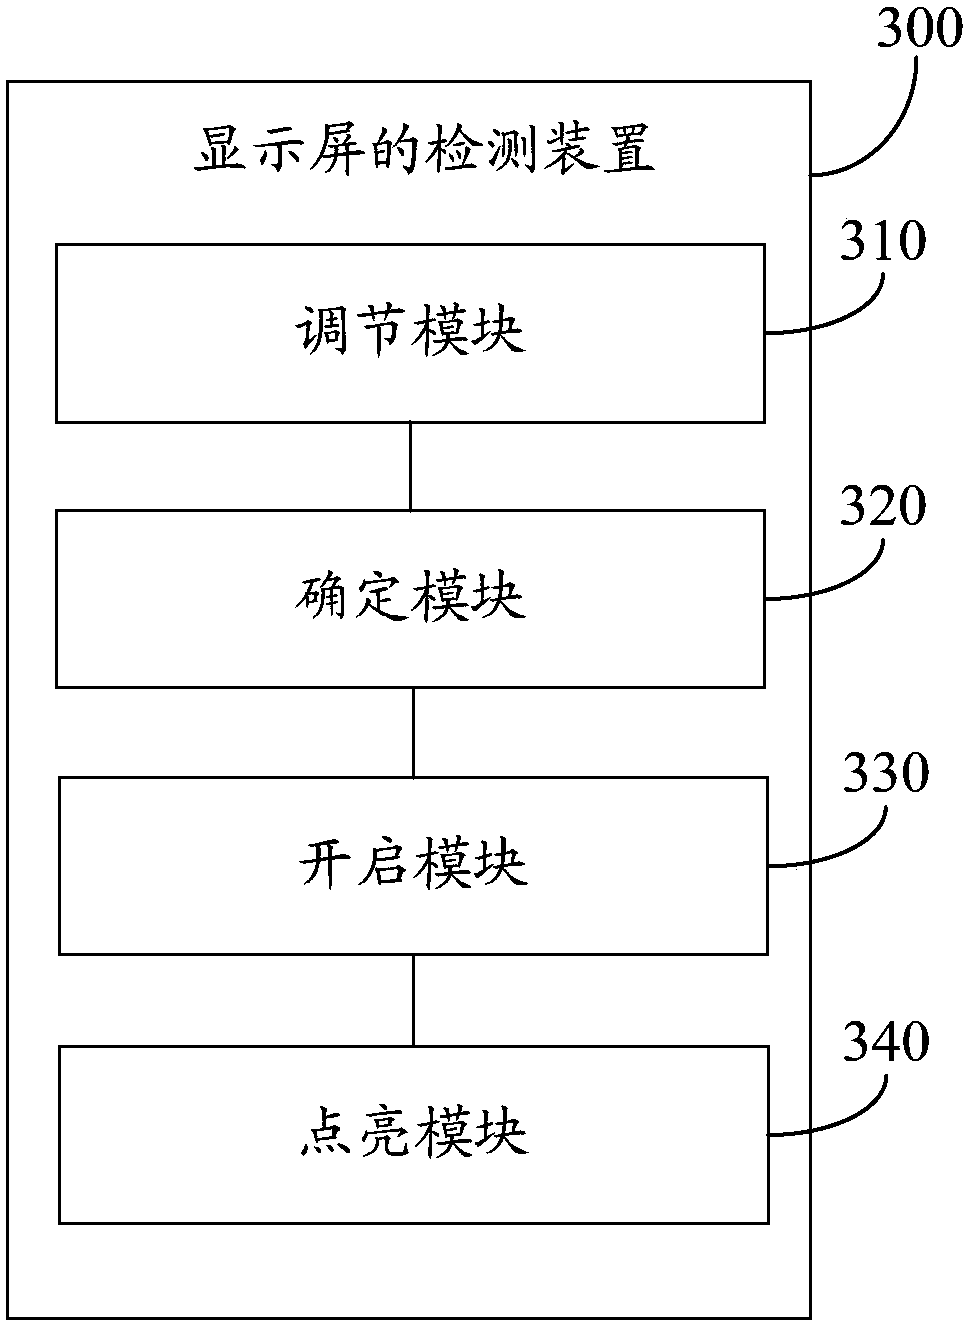 Display screen detection method and device